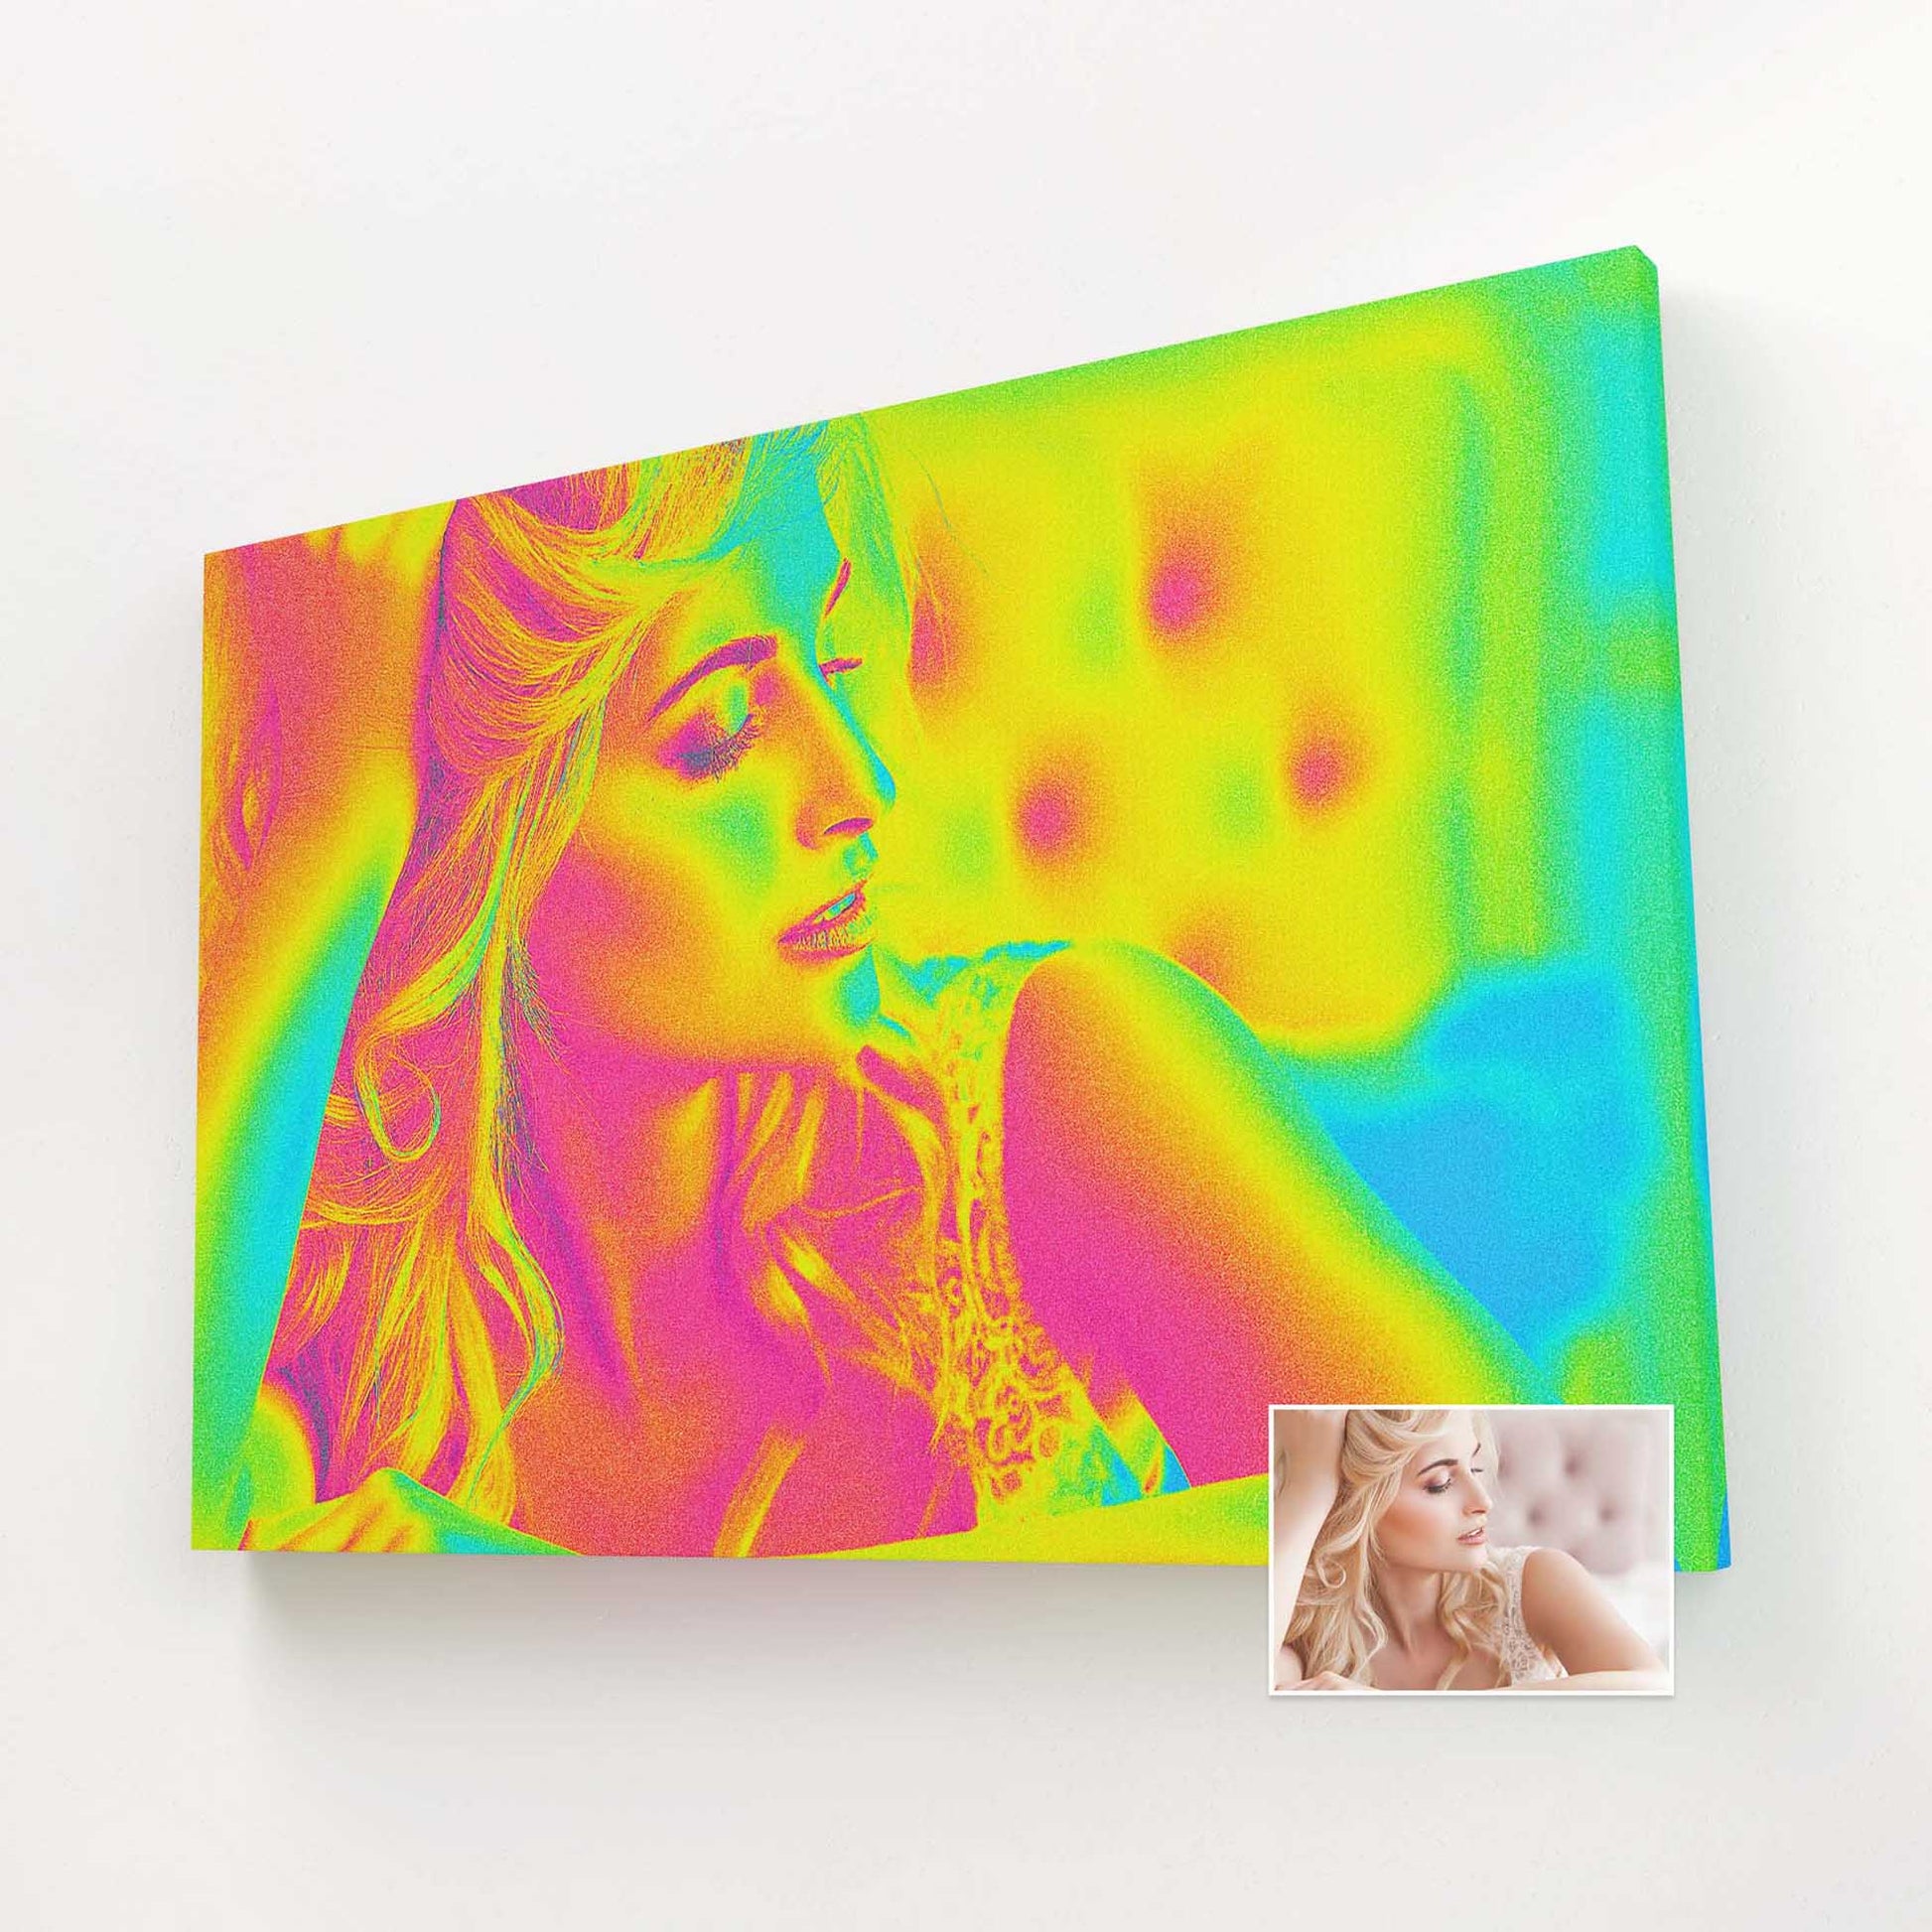 Add a splash of color and excitement to your space with the Personalised Acid Trip Canvas